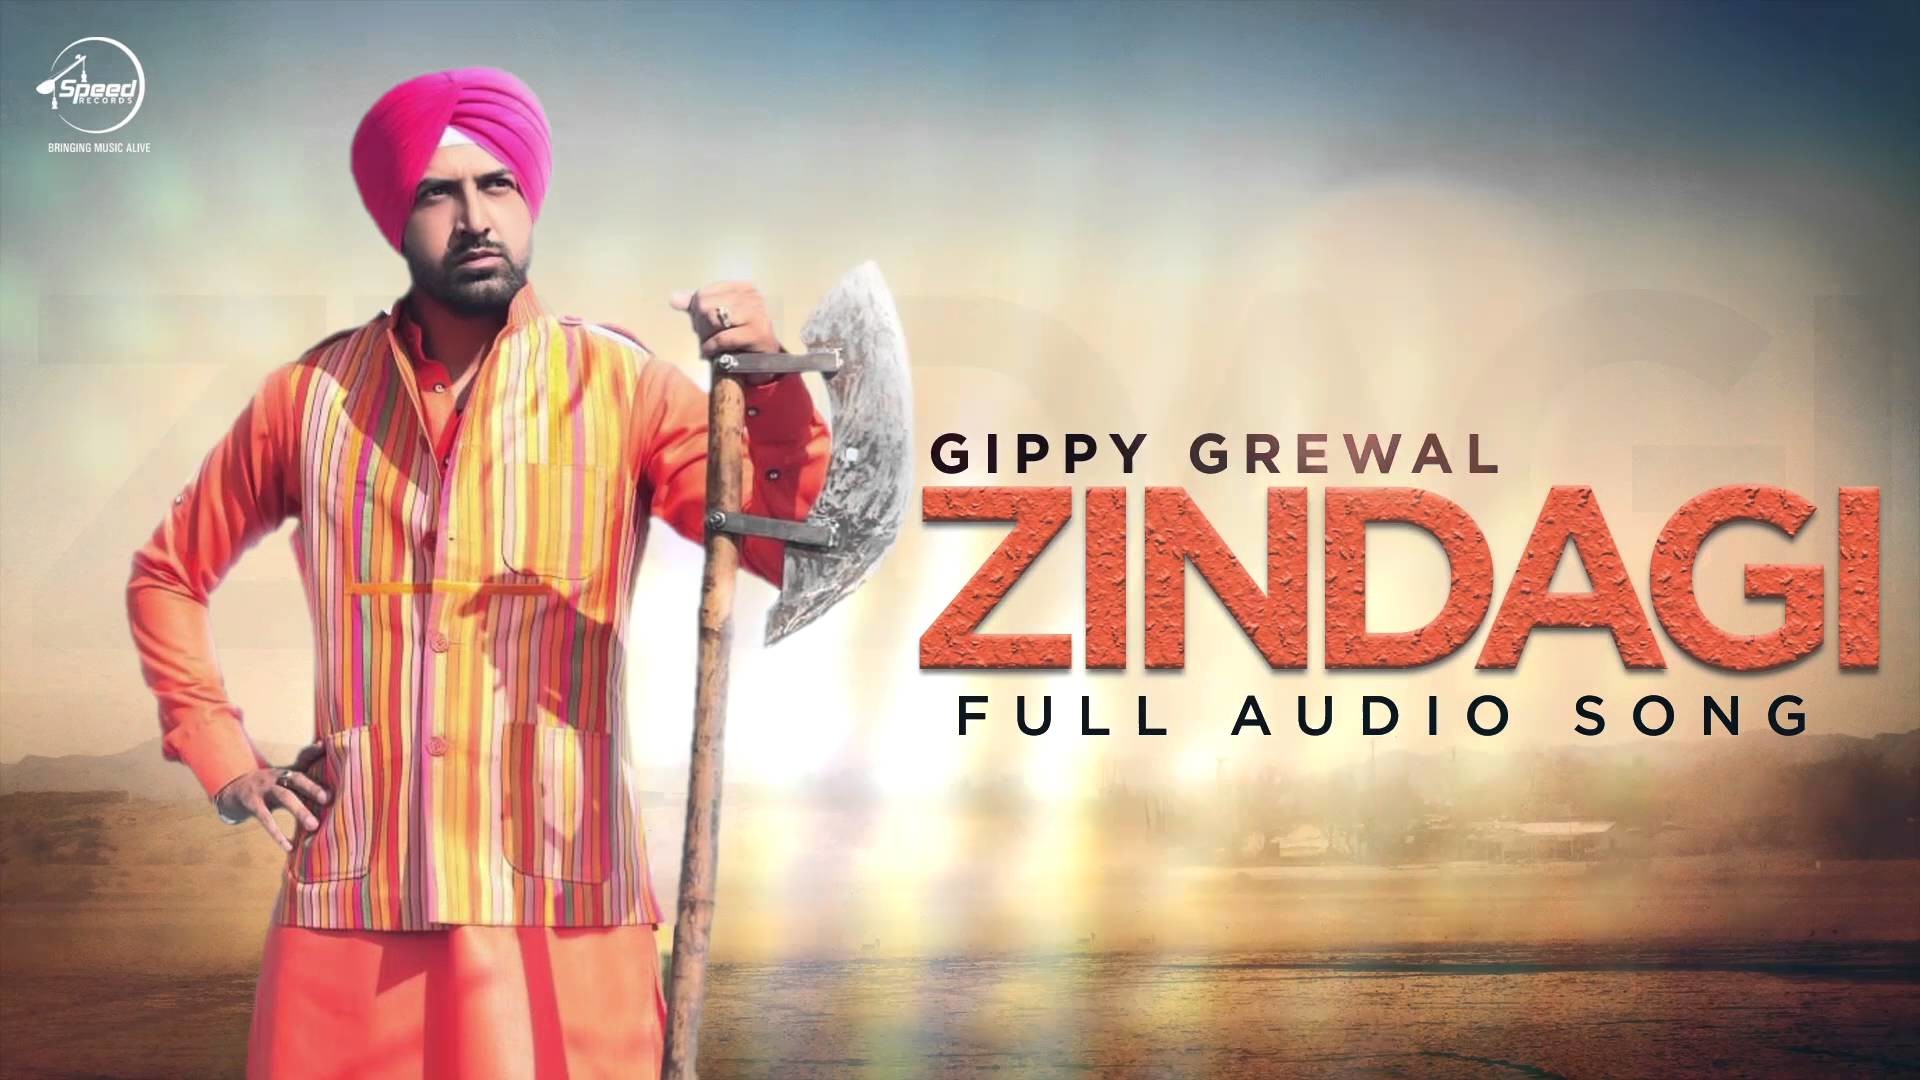 1920x1080 Gippy Grewal HD Wallpapers, Pics, Latest Images, Photos (12)